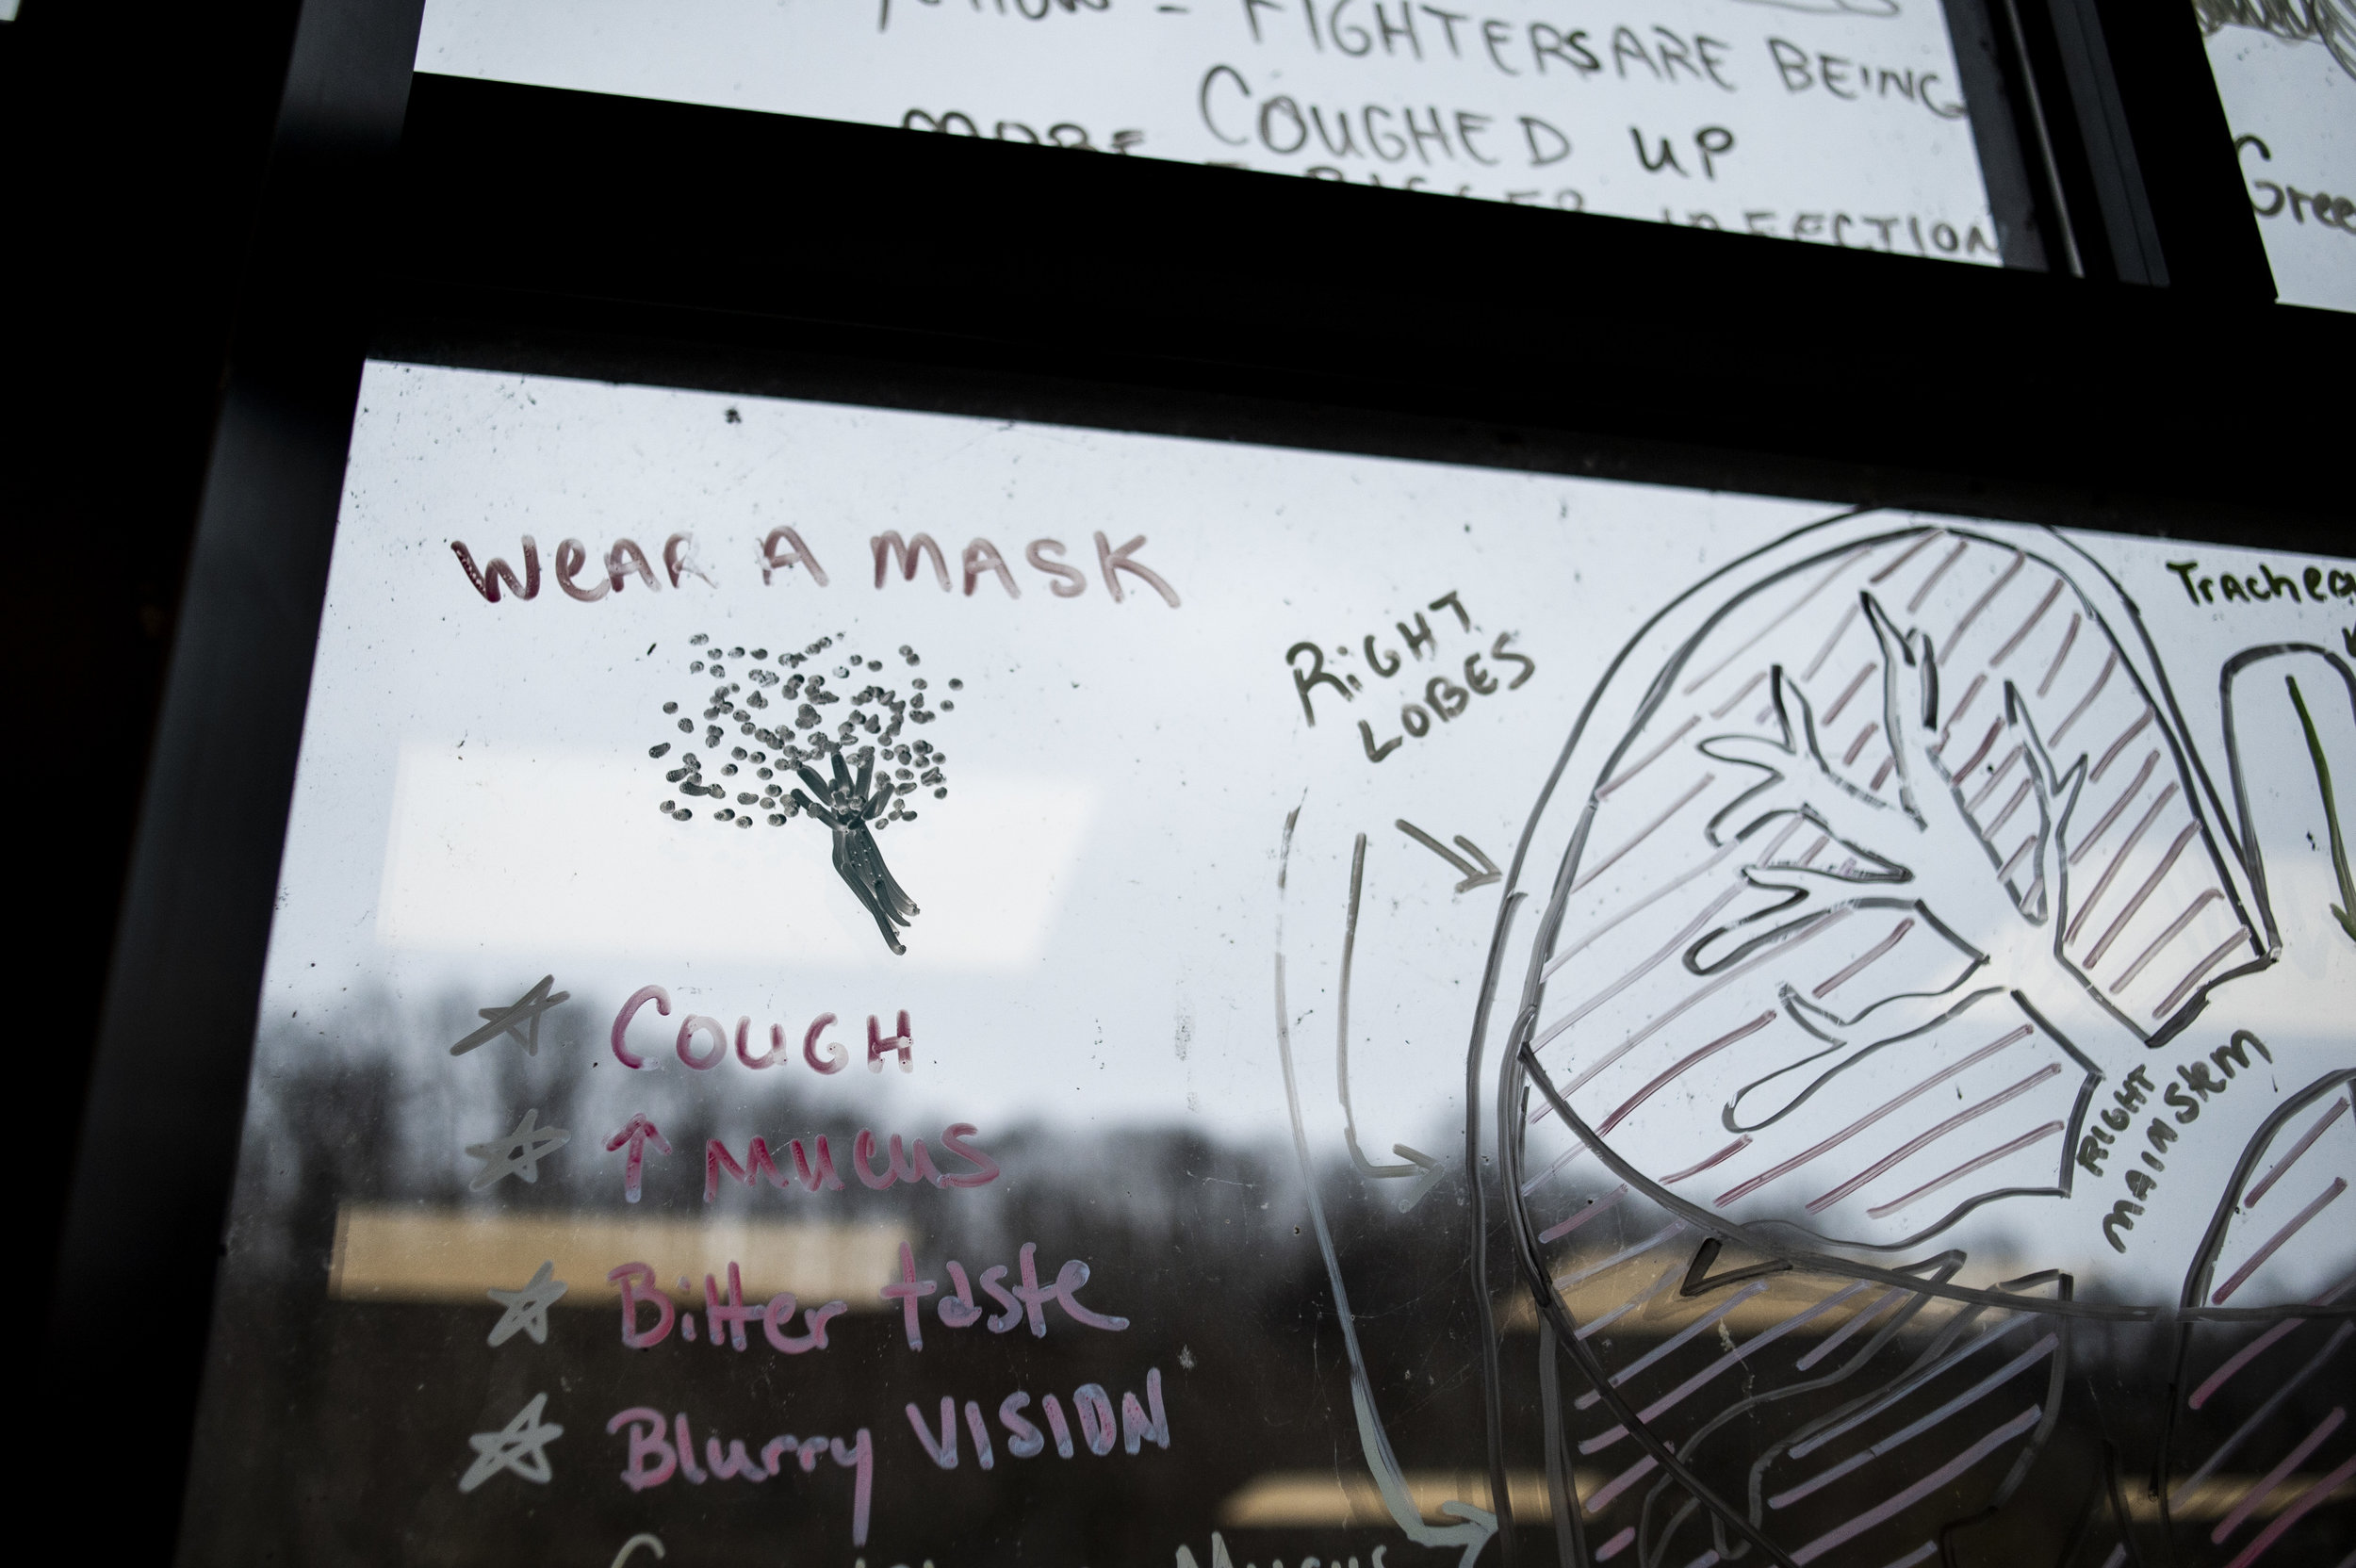  Drawings and information about lung health and Black Lung Disease cover the windows of the New Beginnings Pulmonary Rehab Clinic in South Williamson, Kentucky. 